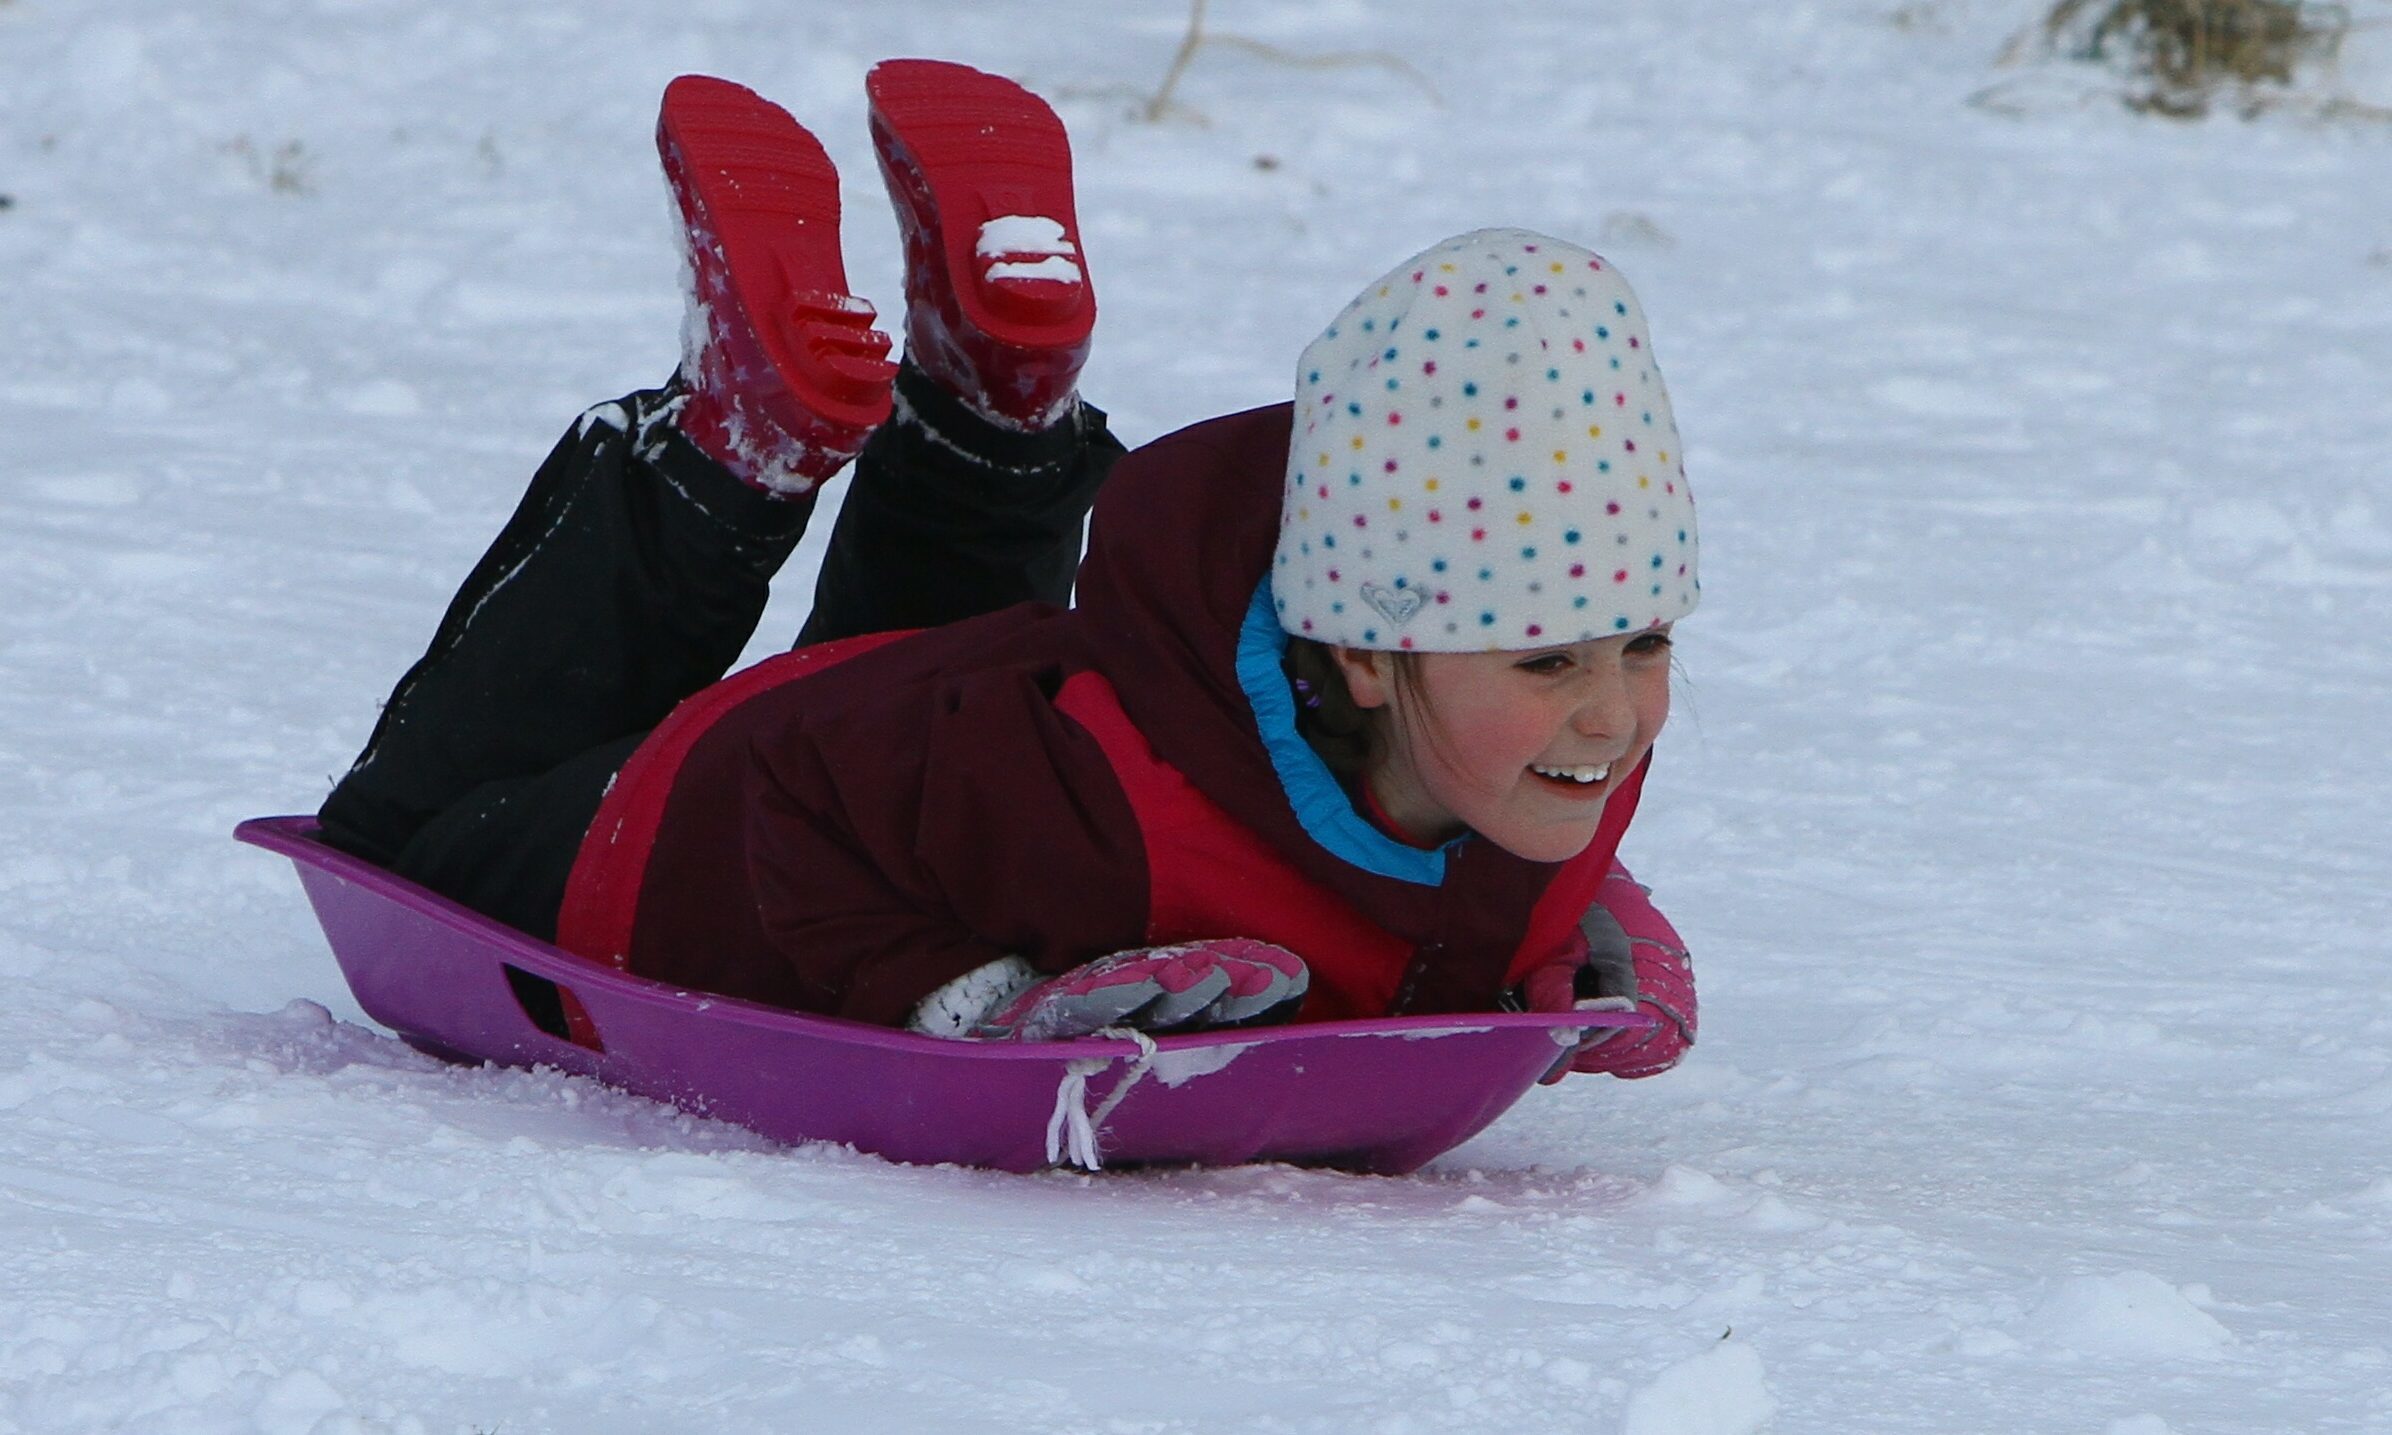 Molly Muirhead having fun in Lochee Park today. Pupils in Tayside and Fife are off until Monday at the earliest.